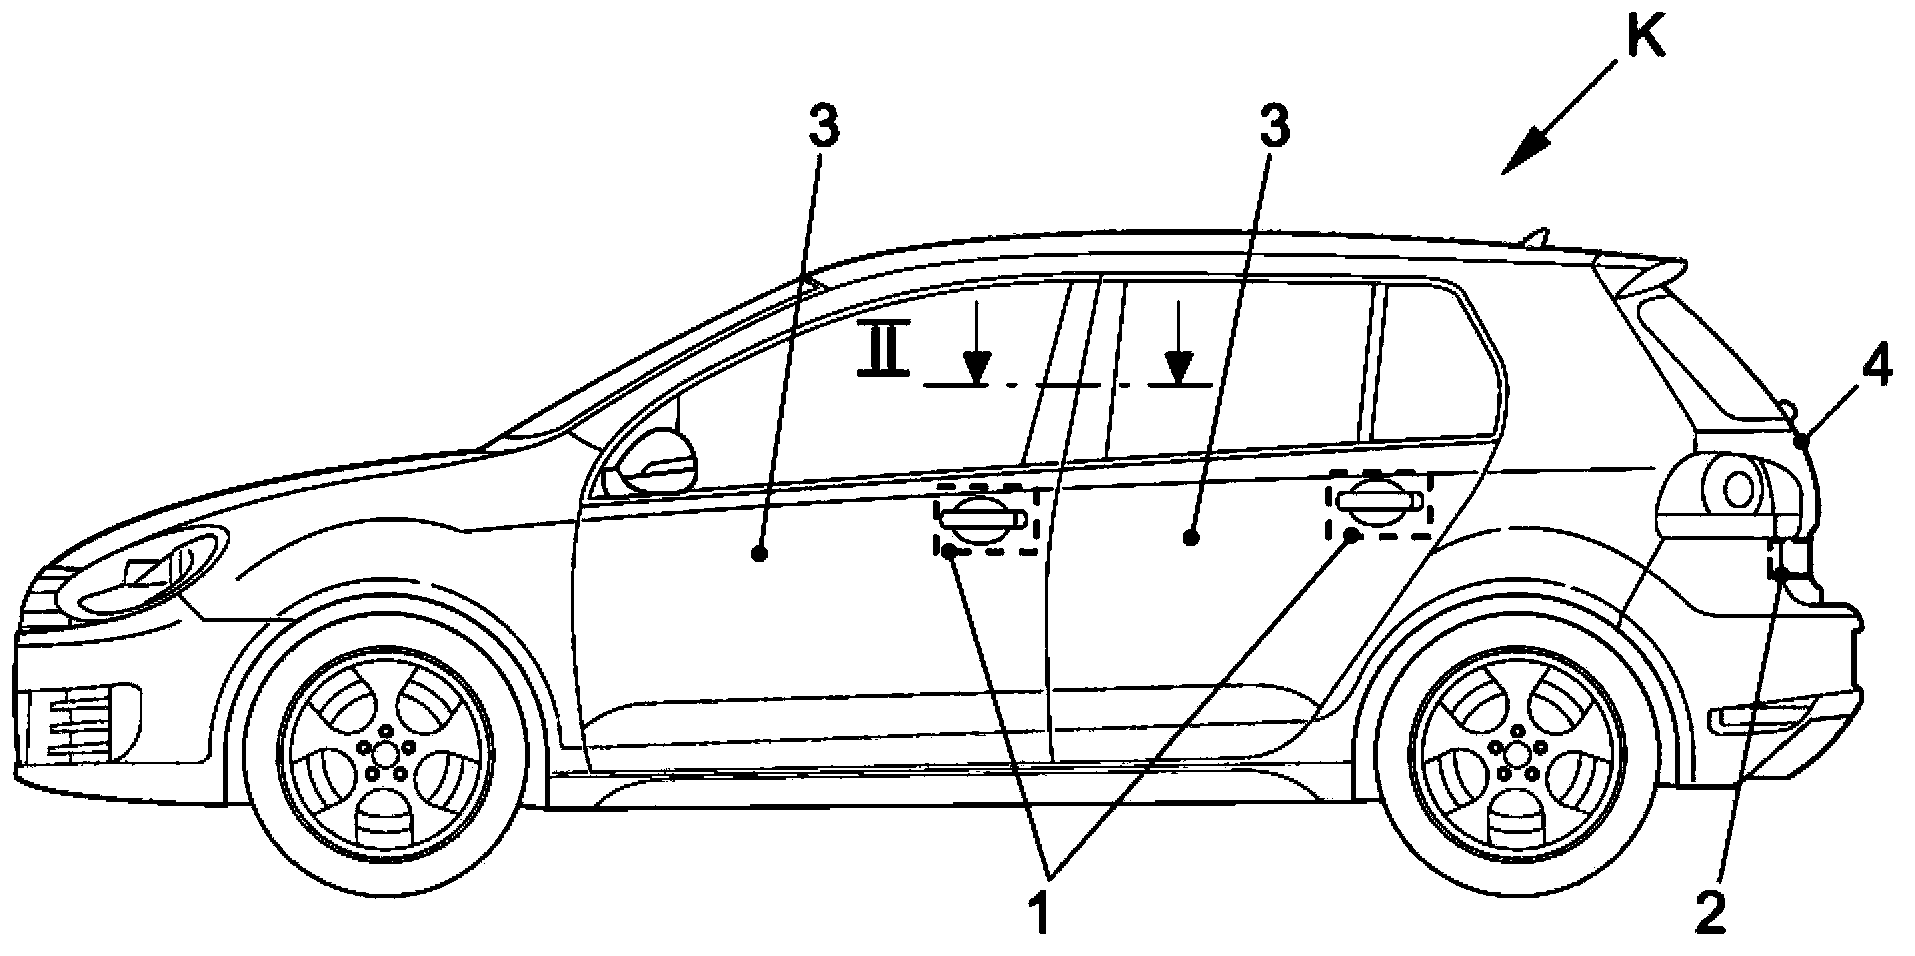 Method for closing vehicle door or trunk cover thereof